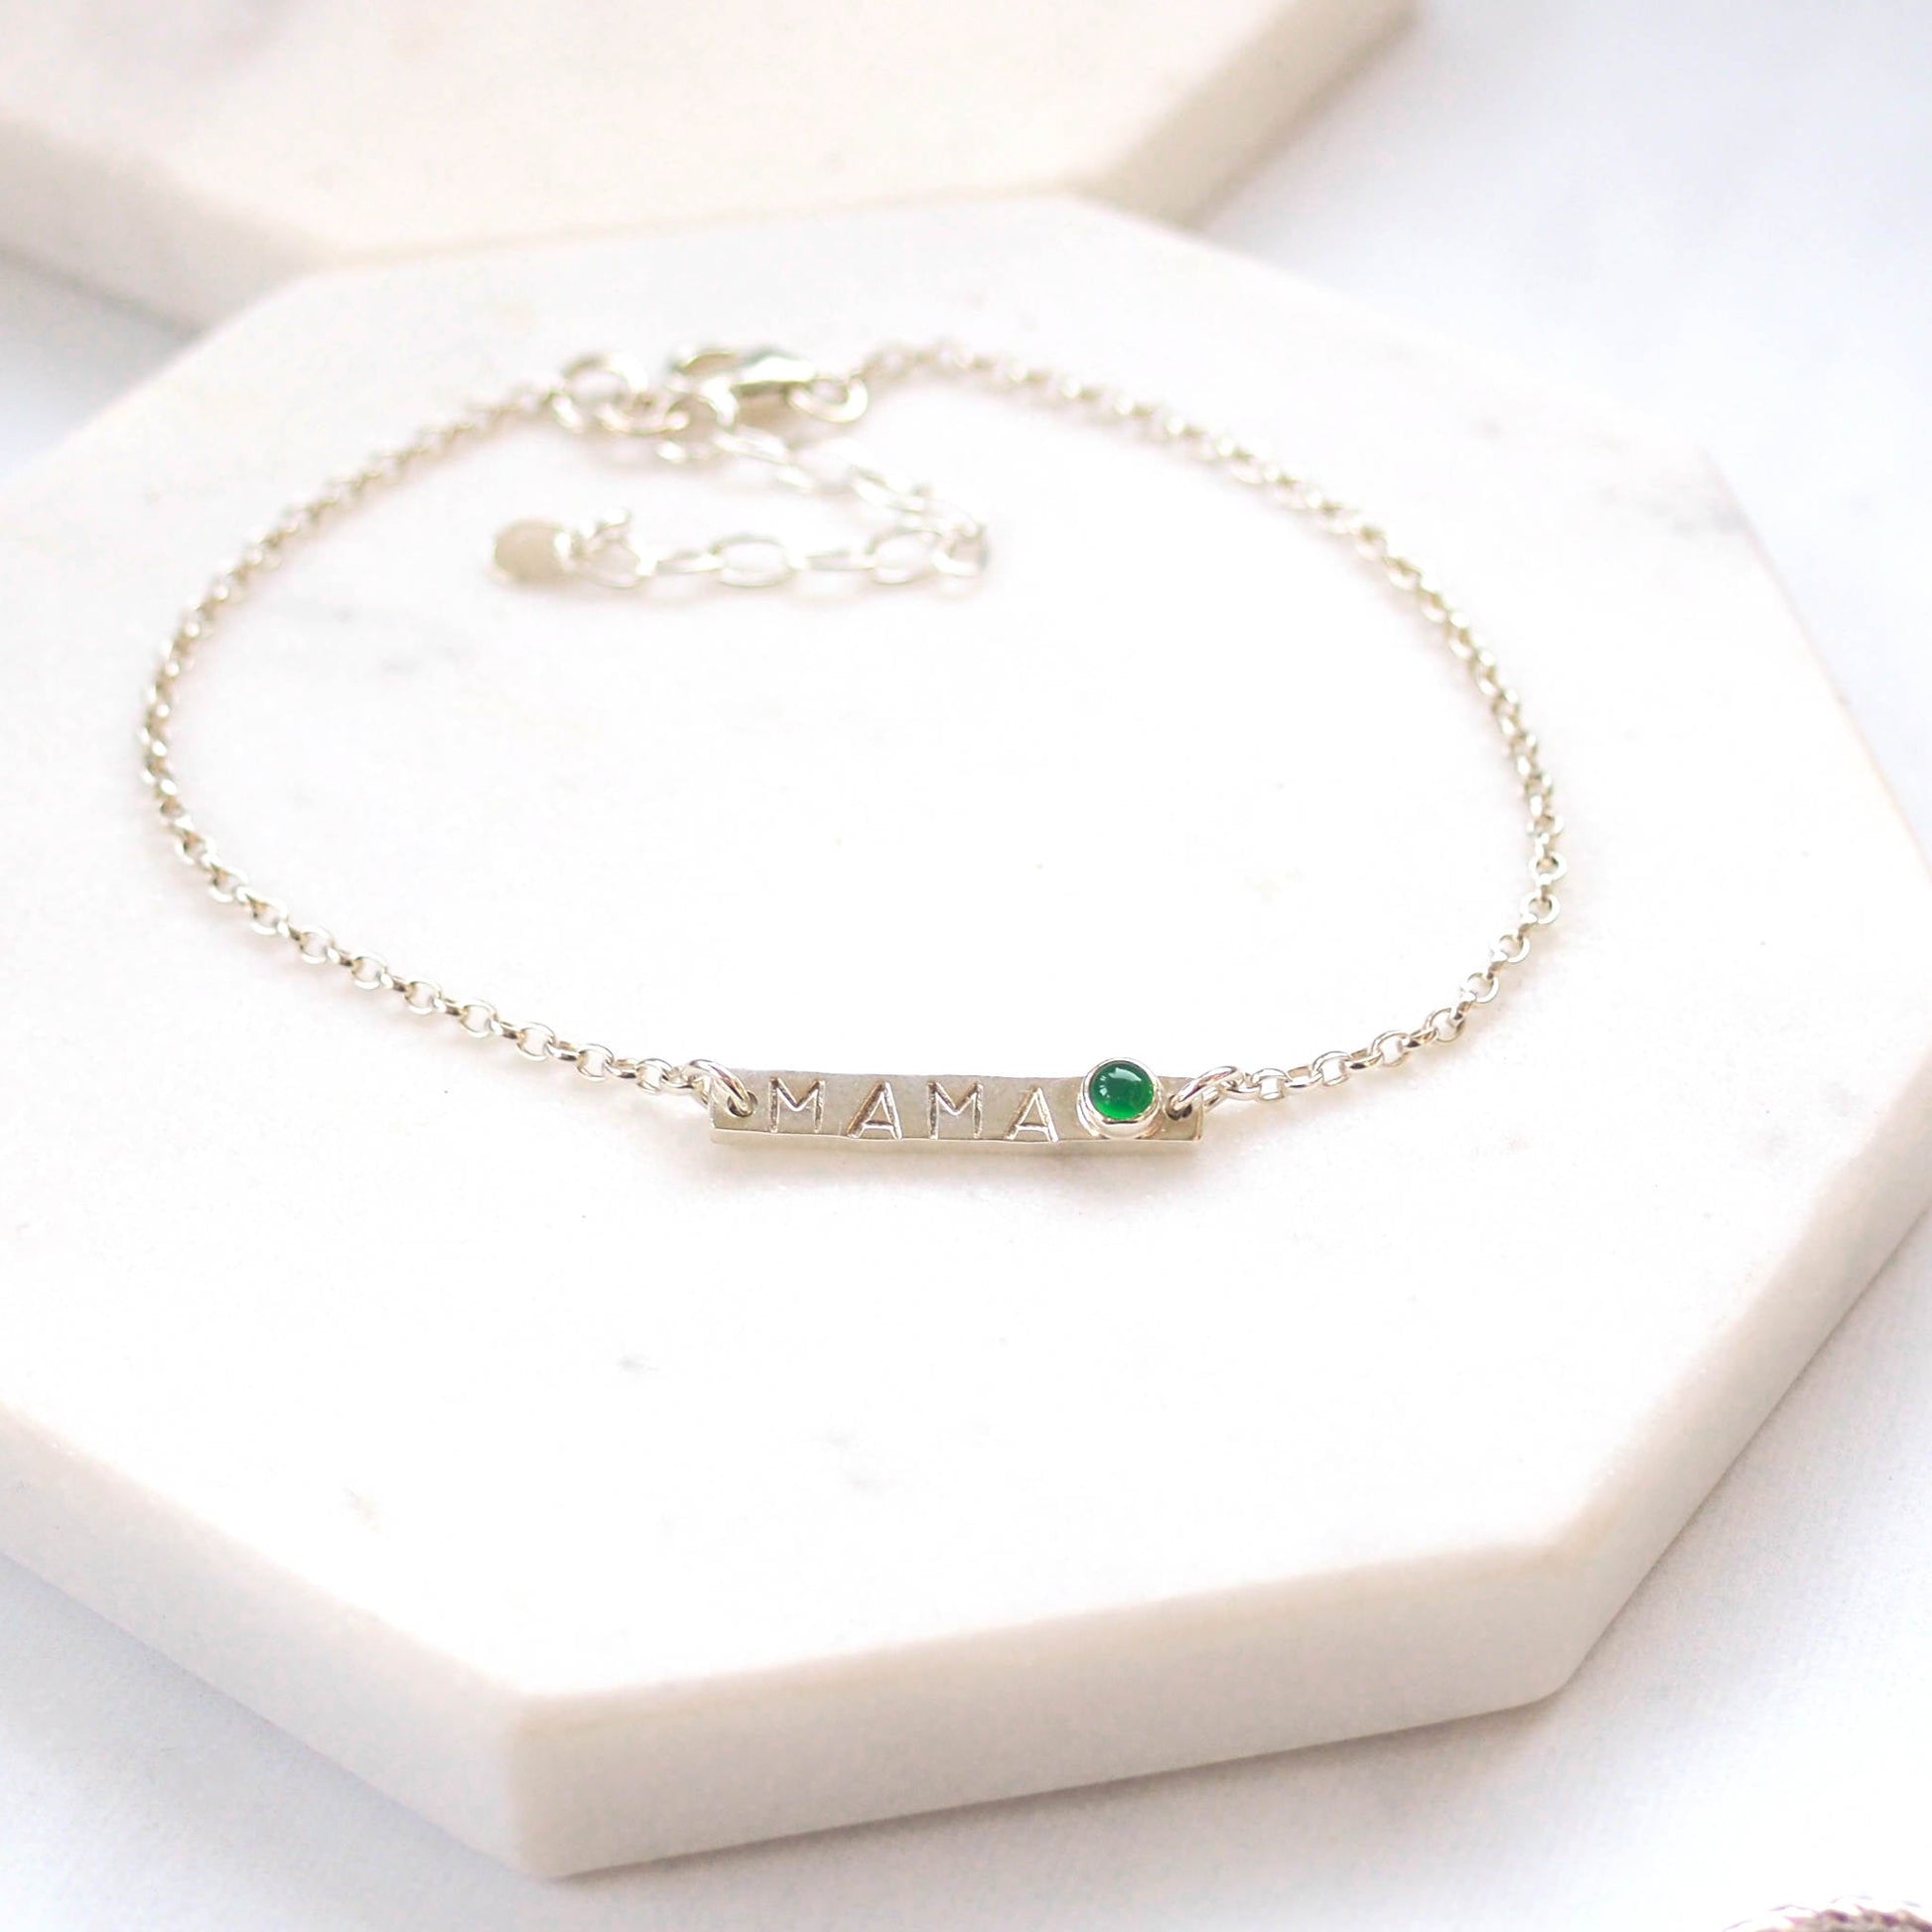 Silver Bar bracelet with hand stamped MAMA with a baby birthstone in May Green Agate. Handmade by maram jewellery in Scotland UK